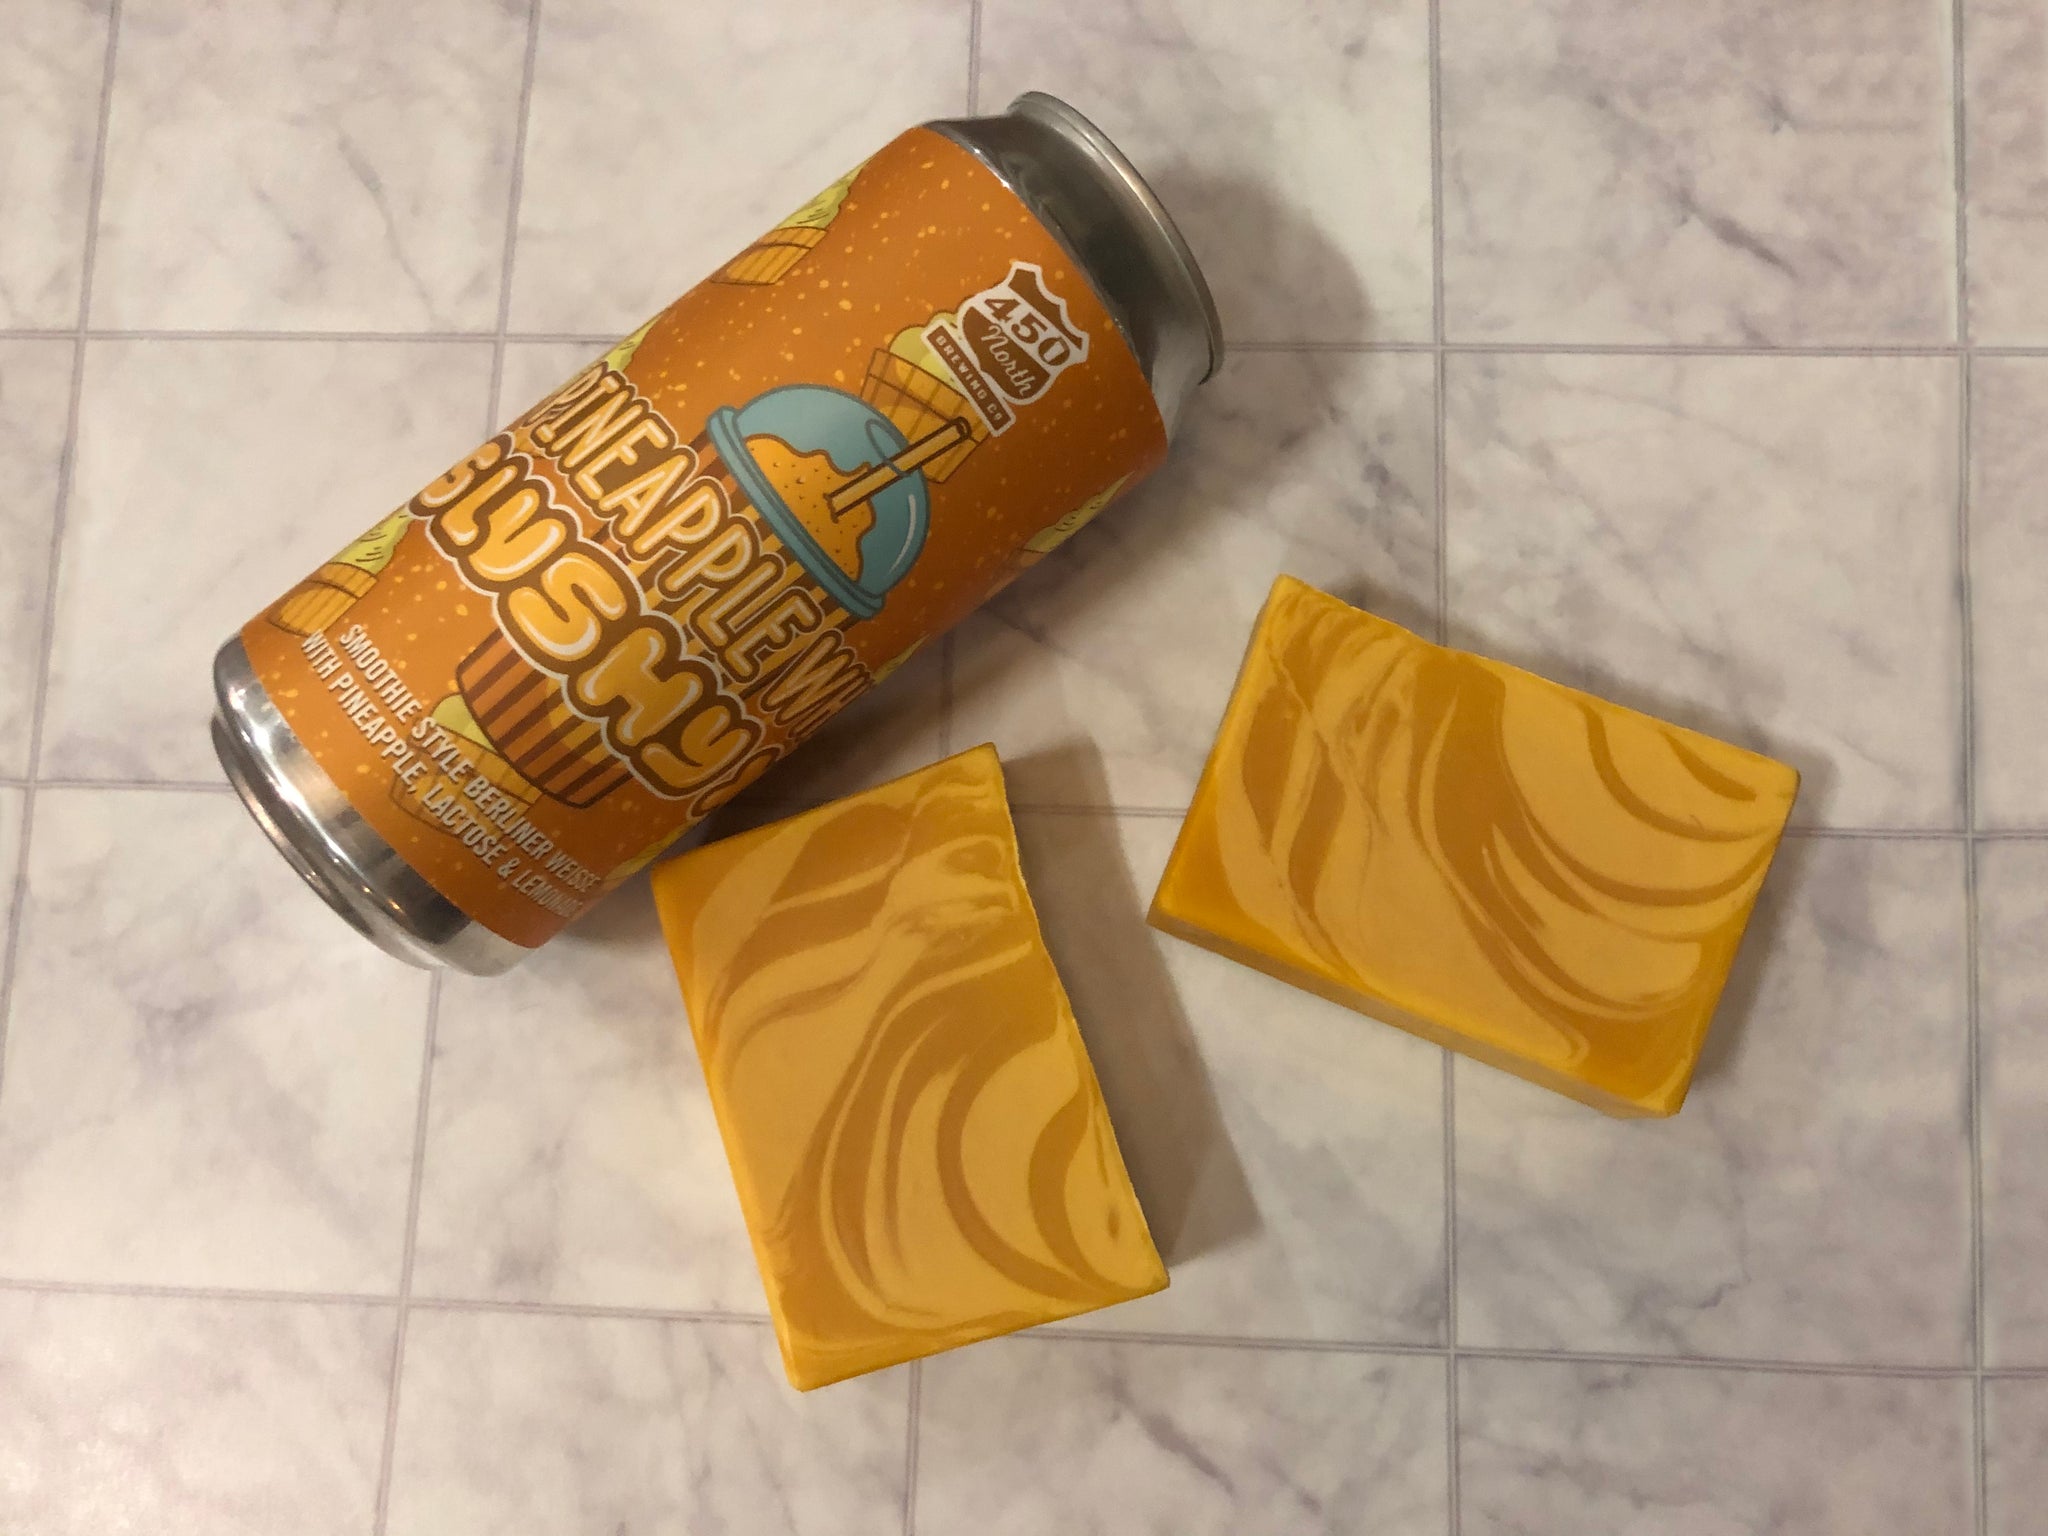 craft beer soap handmade with pineapple whip slushy xl beer from 450 north brewing company yellow pineapple soap 